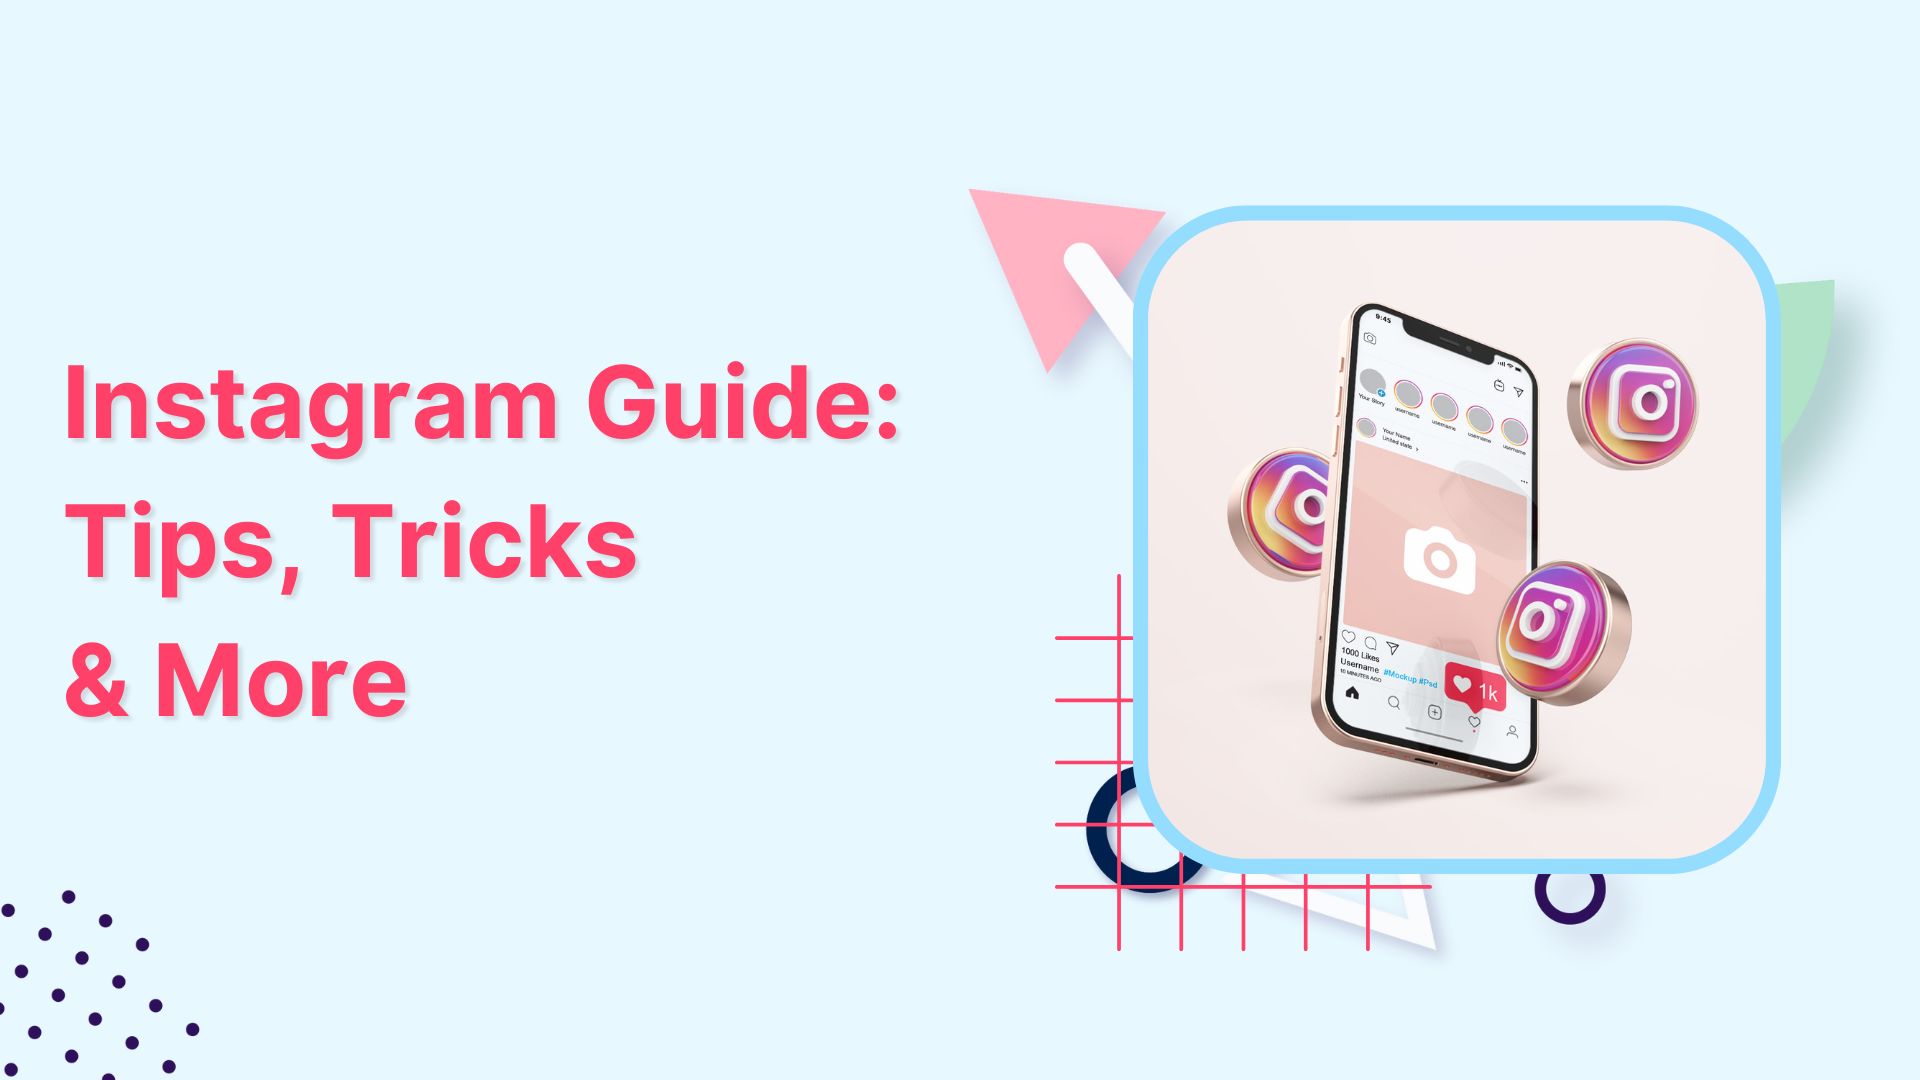 Marketing with Instagram Guides: Tips, Tricks & More